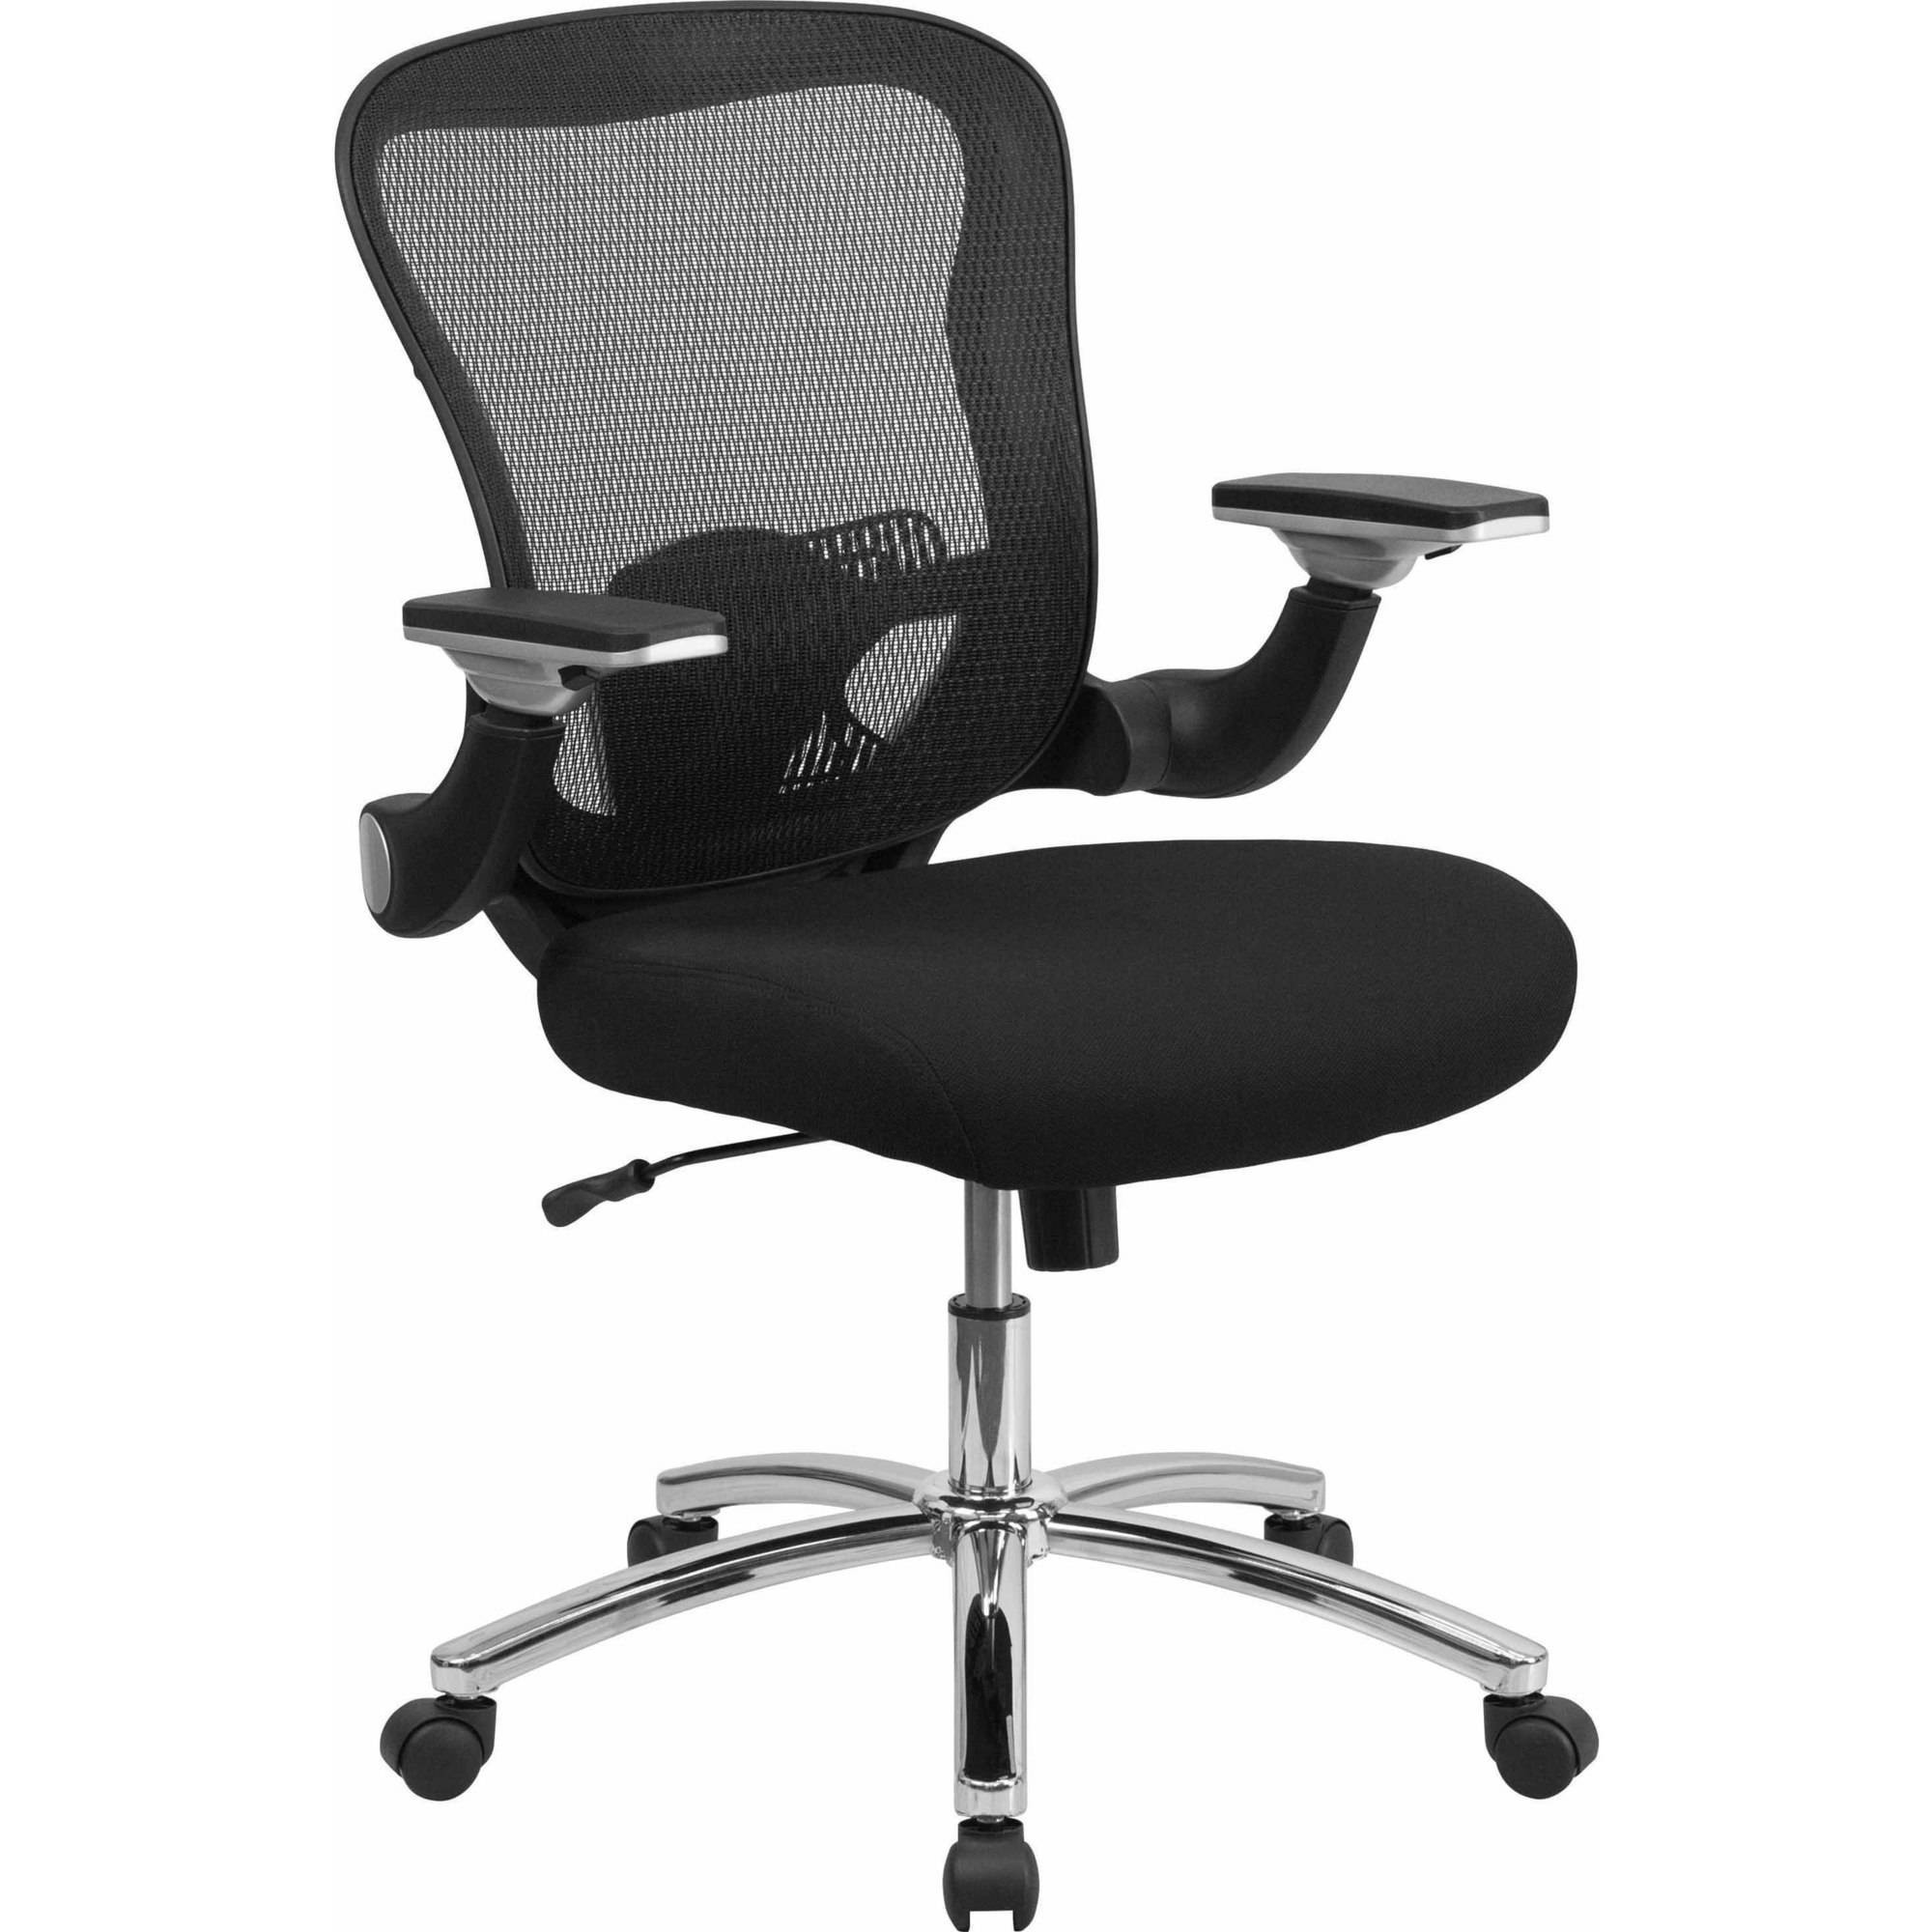 Best ideas about Swivel Office Chair
. Save or Pin Executive Racing fice Chair PU Leather Swivel puter Now.